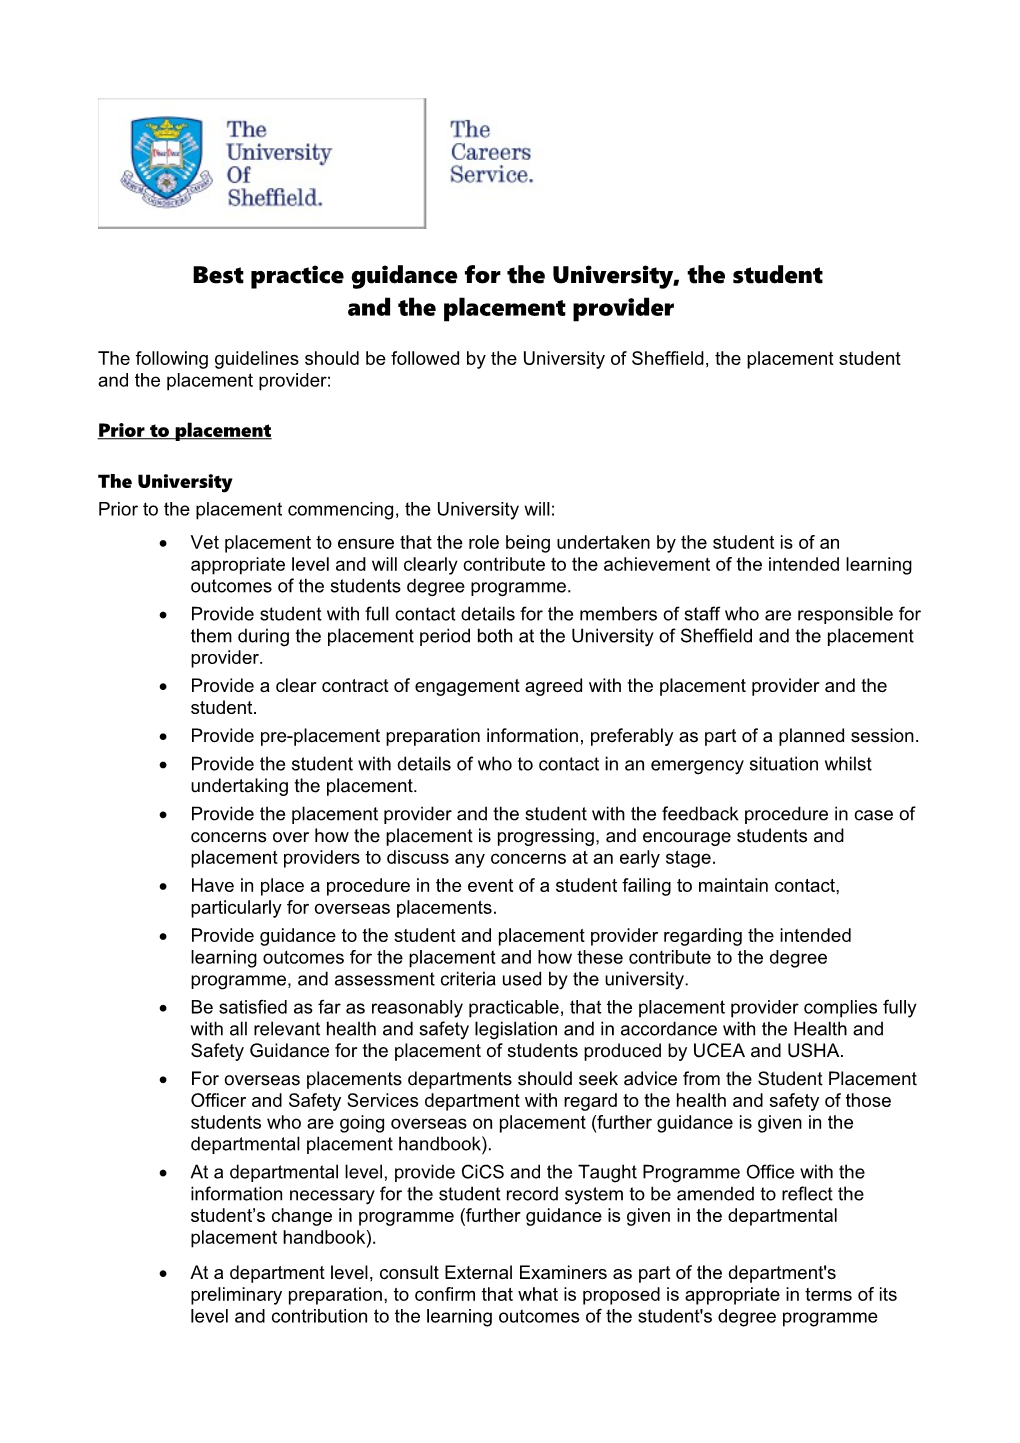 Best Practice Guidance for the University, the Student And